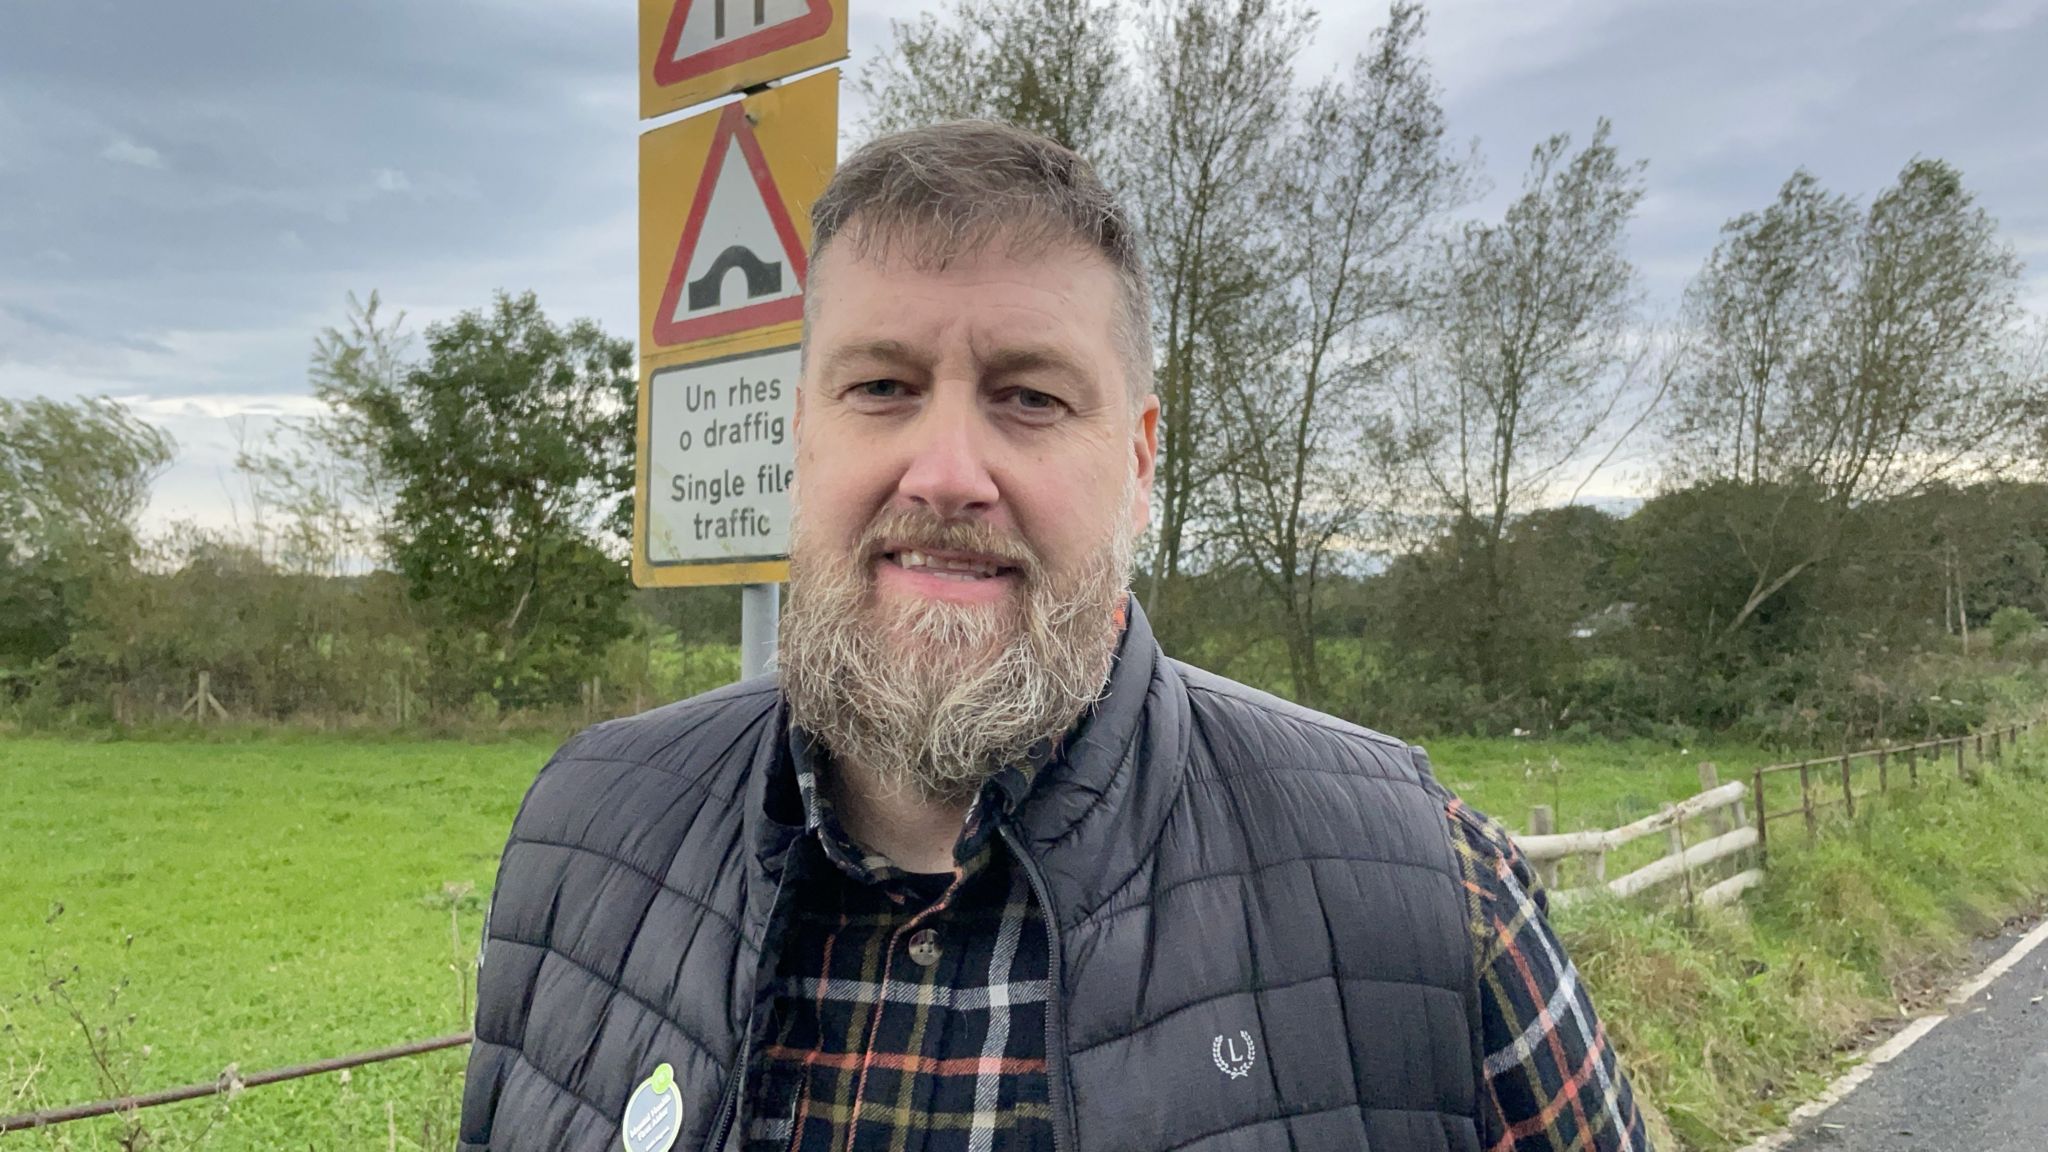 Councillor Chris Evan stood in front of a sign warning of single file crossing over Llanerch bridge - prior to the bridge being completely destroyed